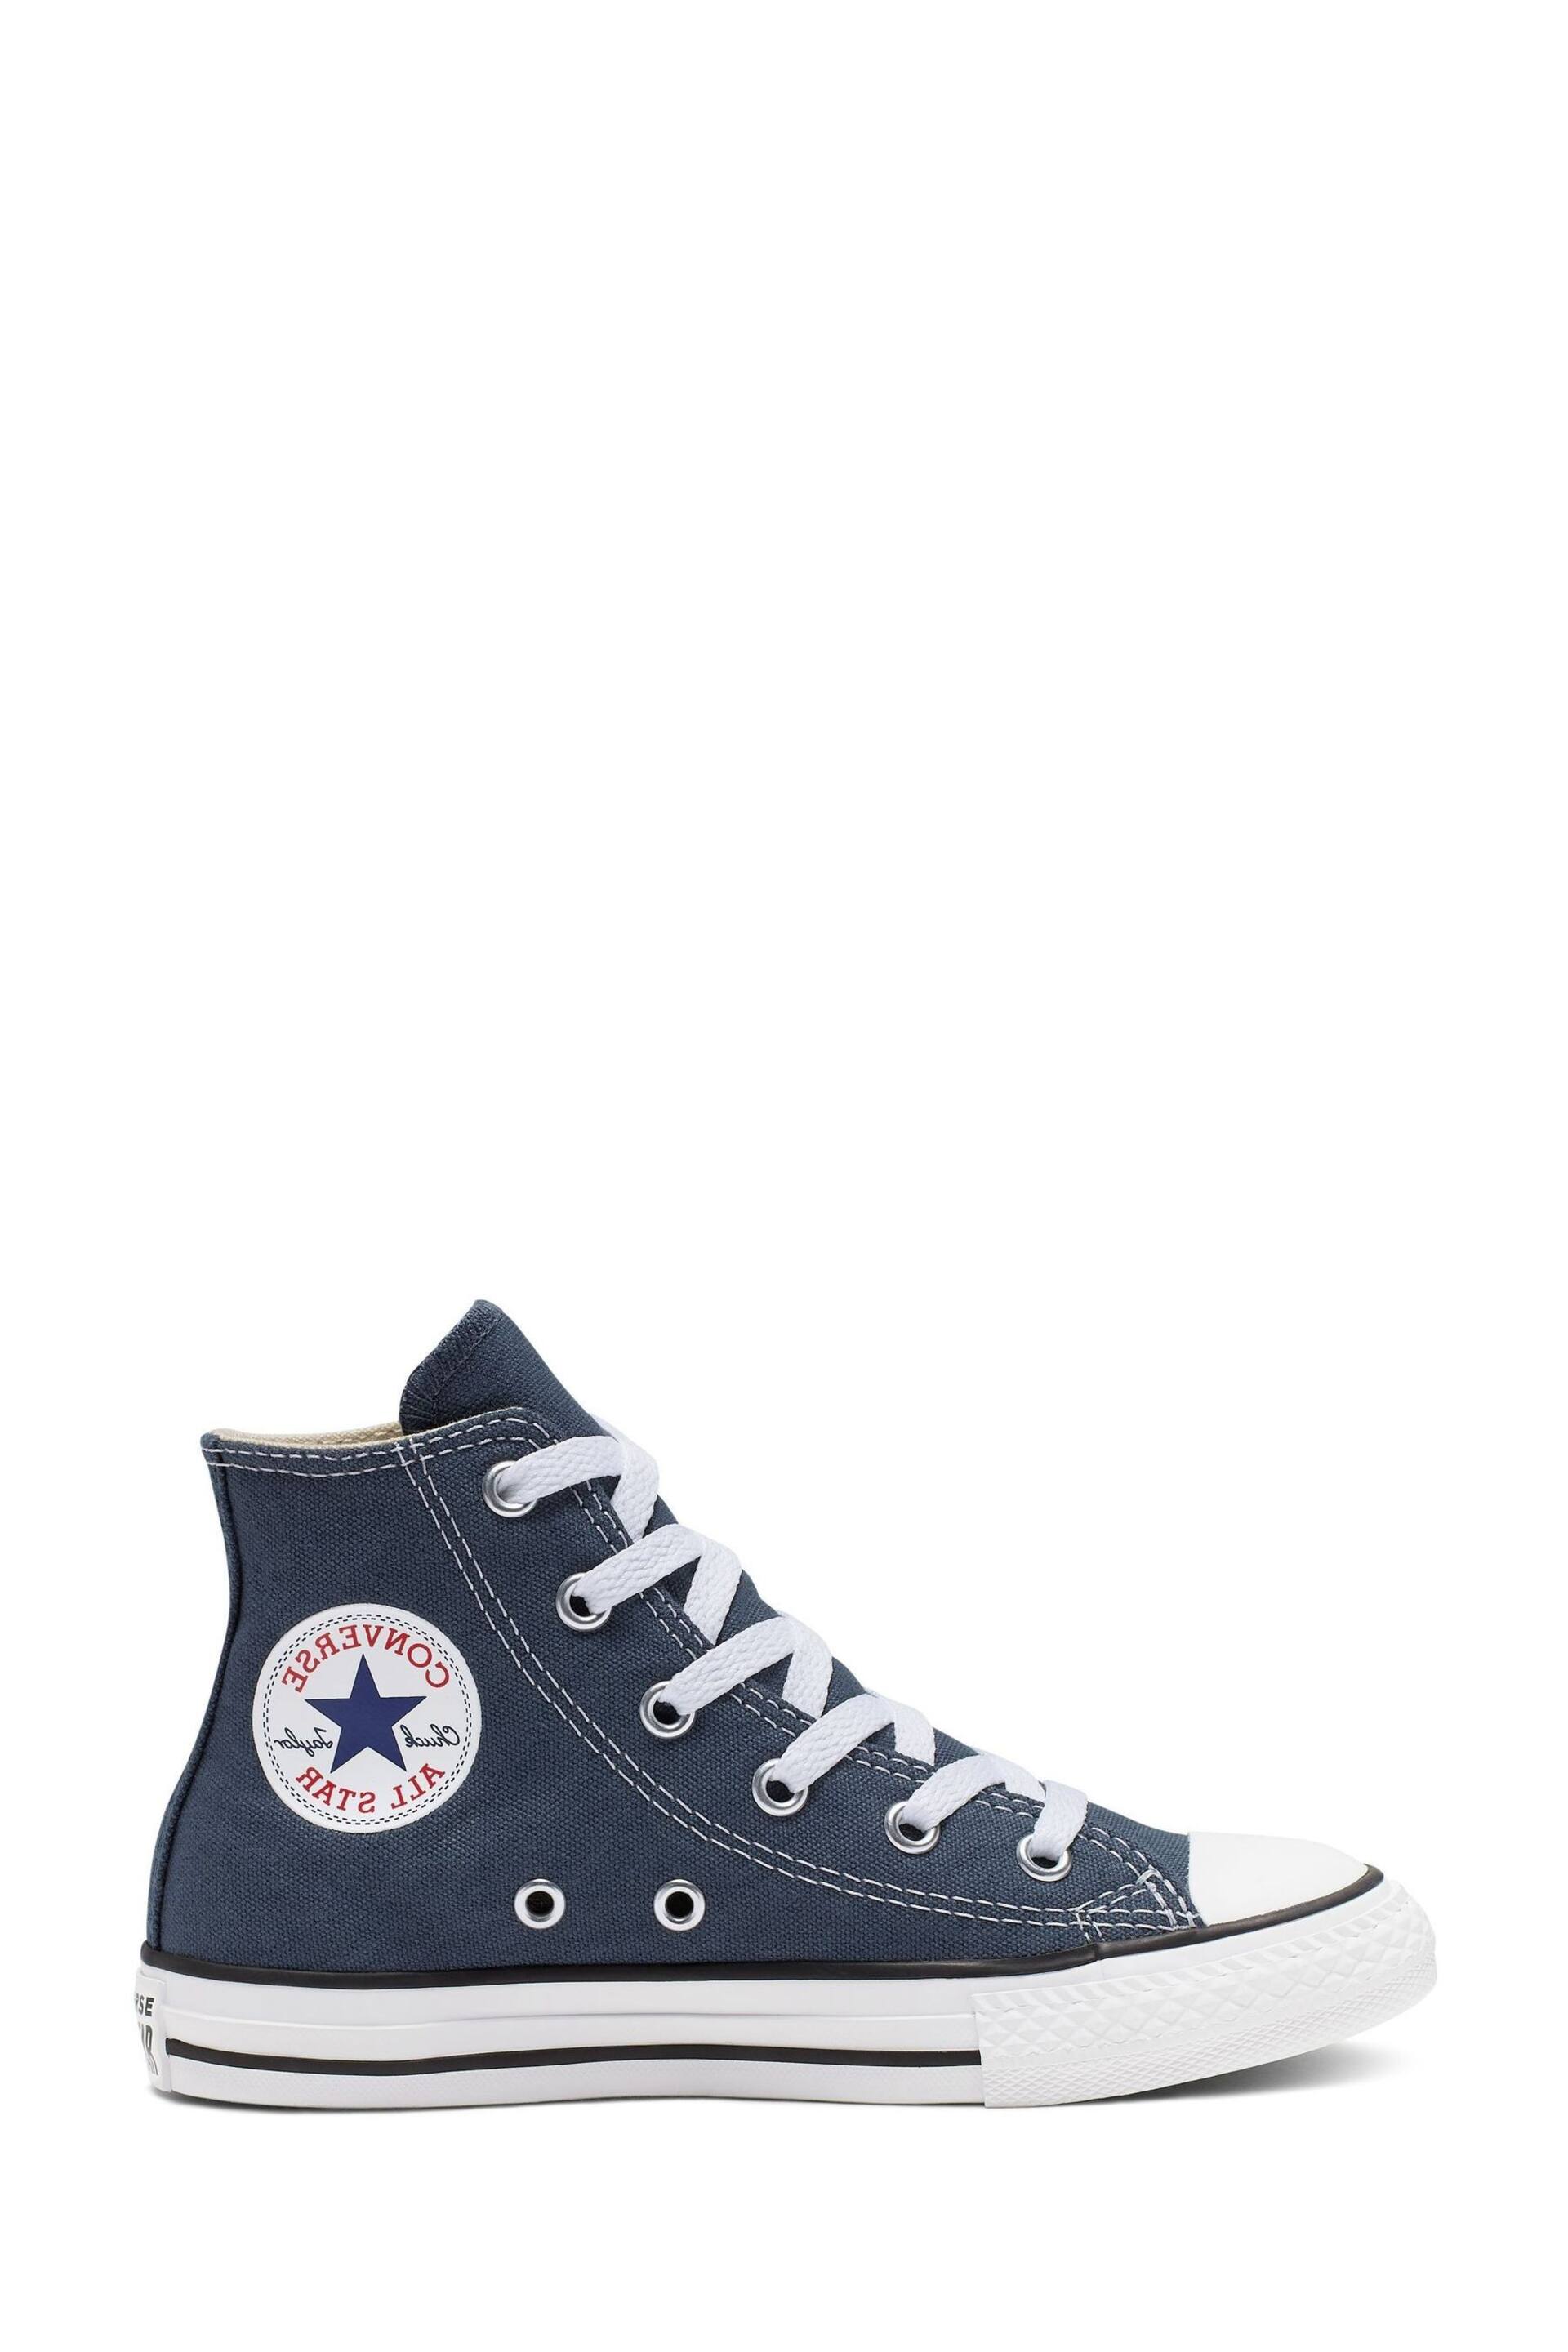 Converse Navy Blue Chuck Taylor High Top Junior Trainers - Image 1 of 3